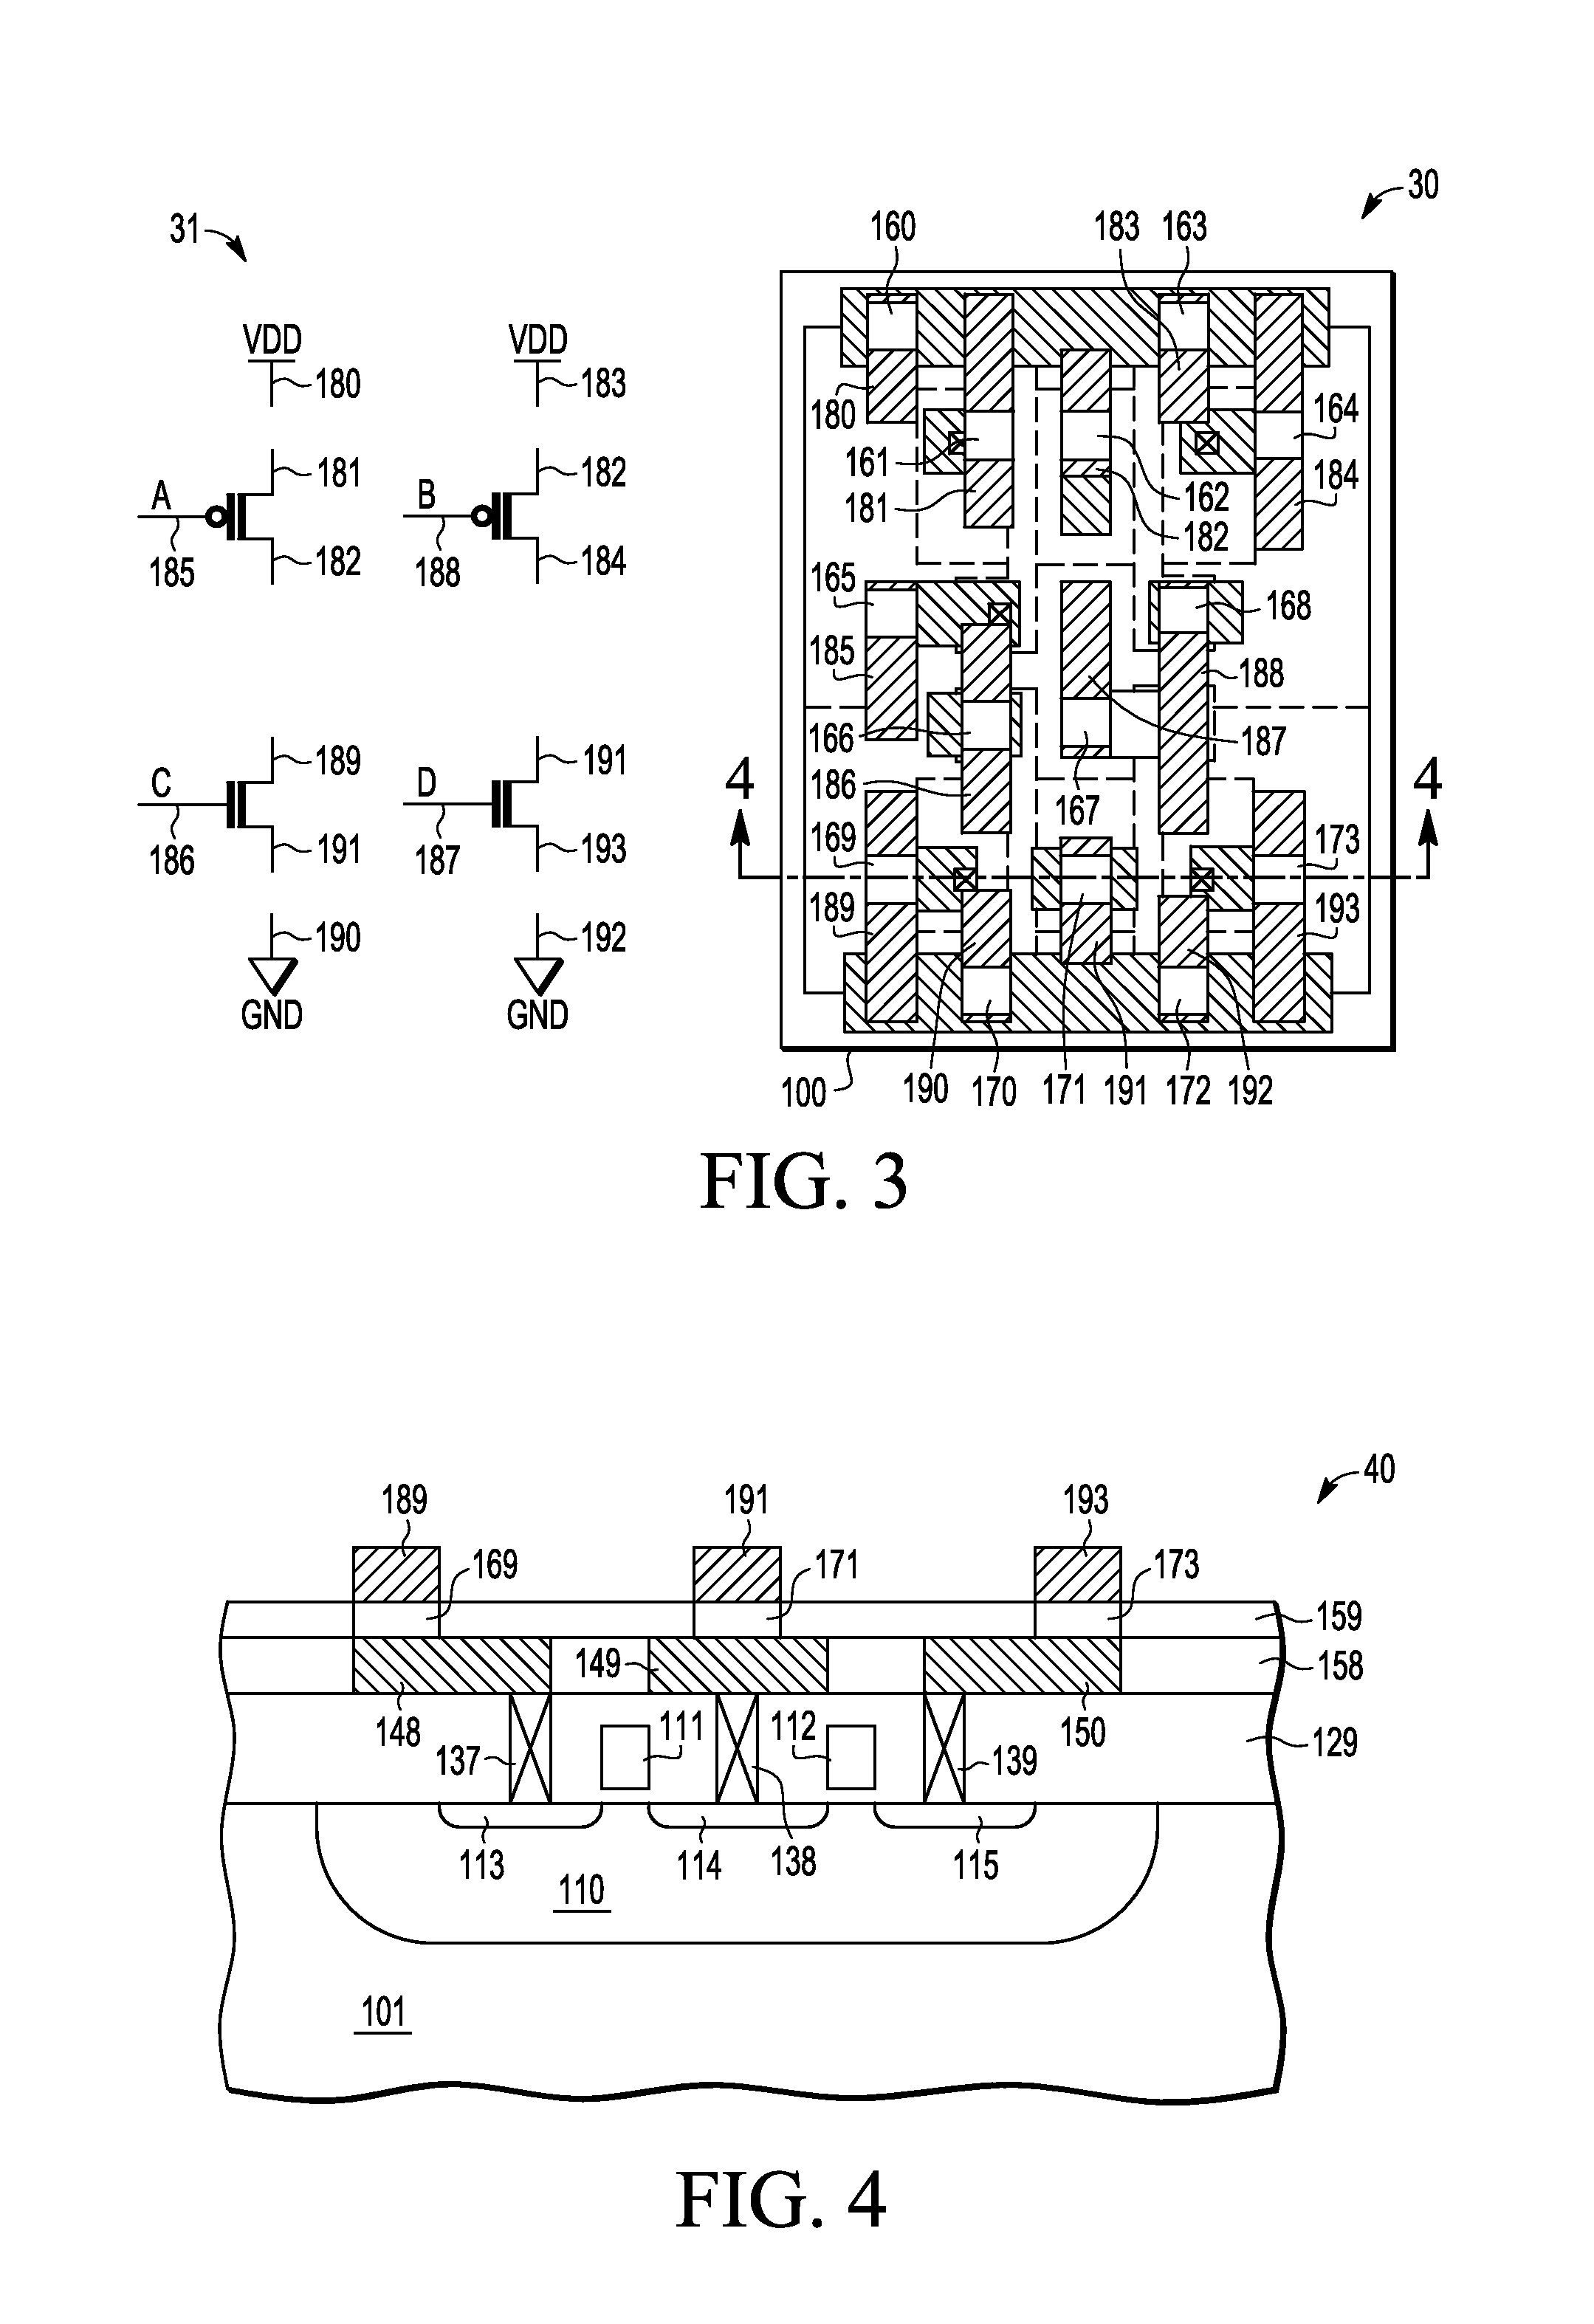 Reconfigurable engineering change order base cell